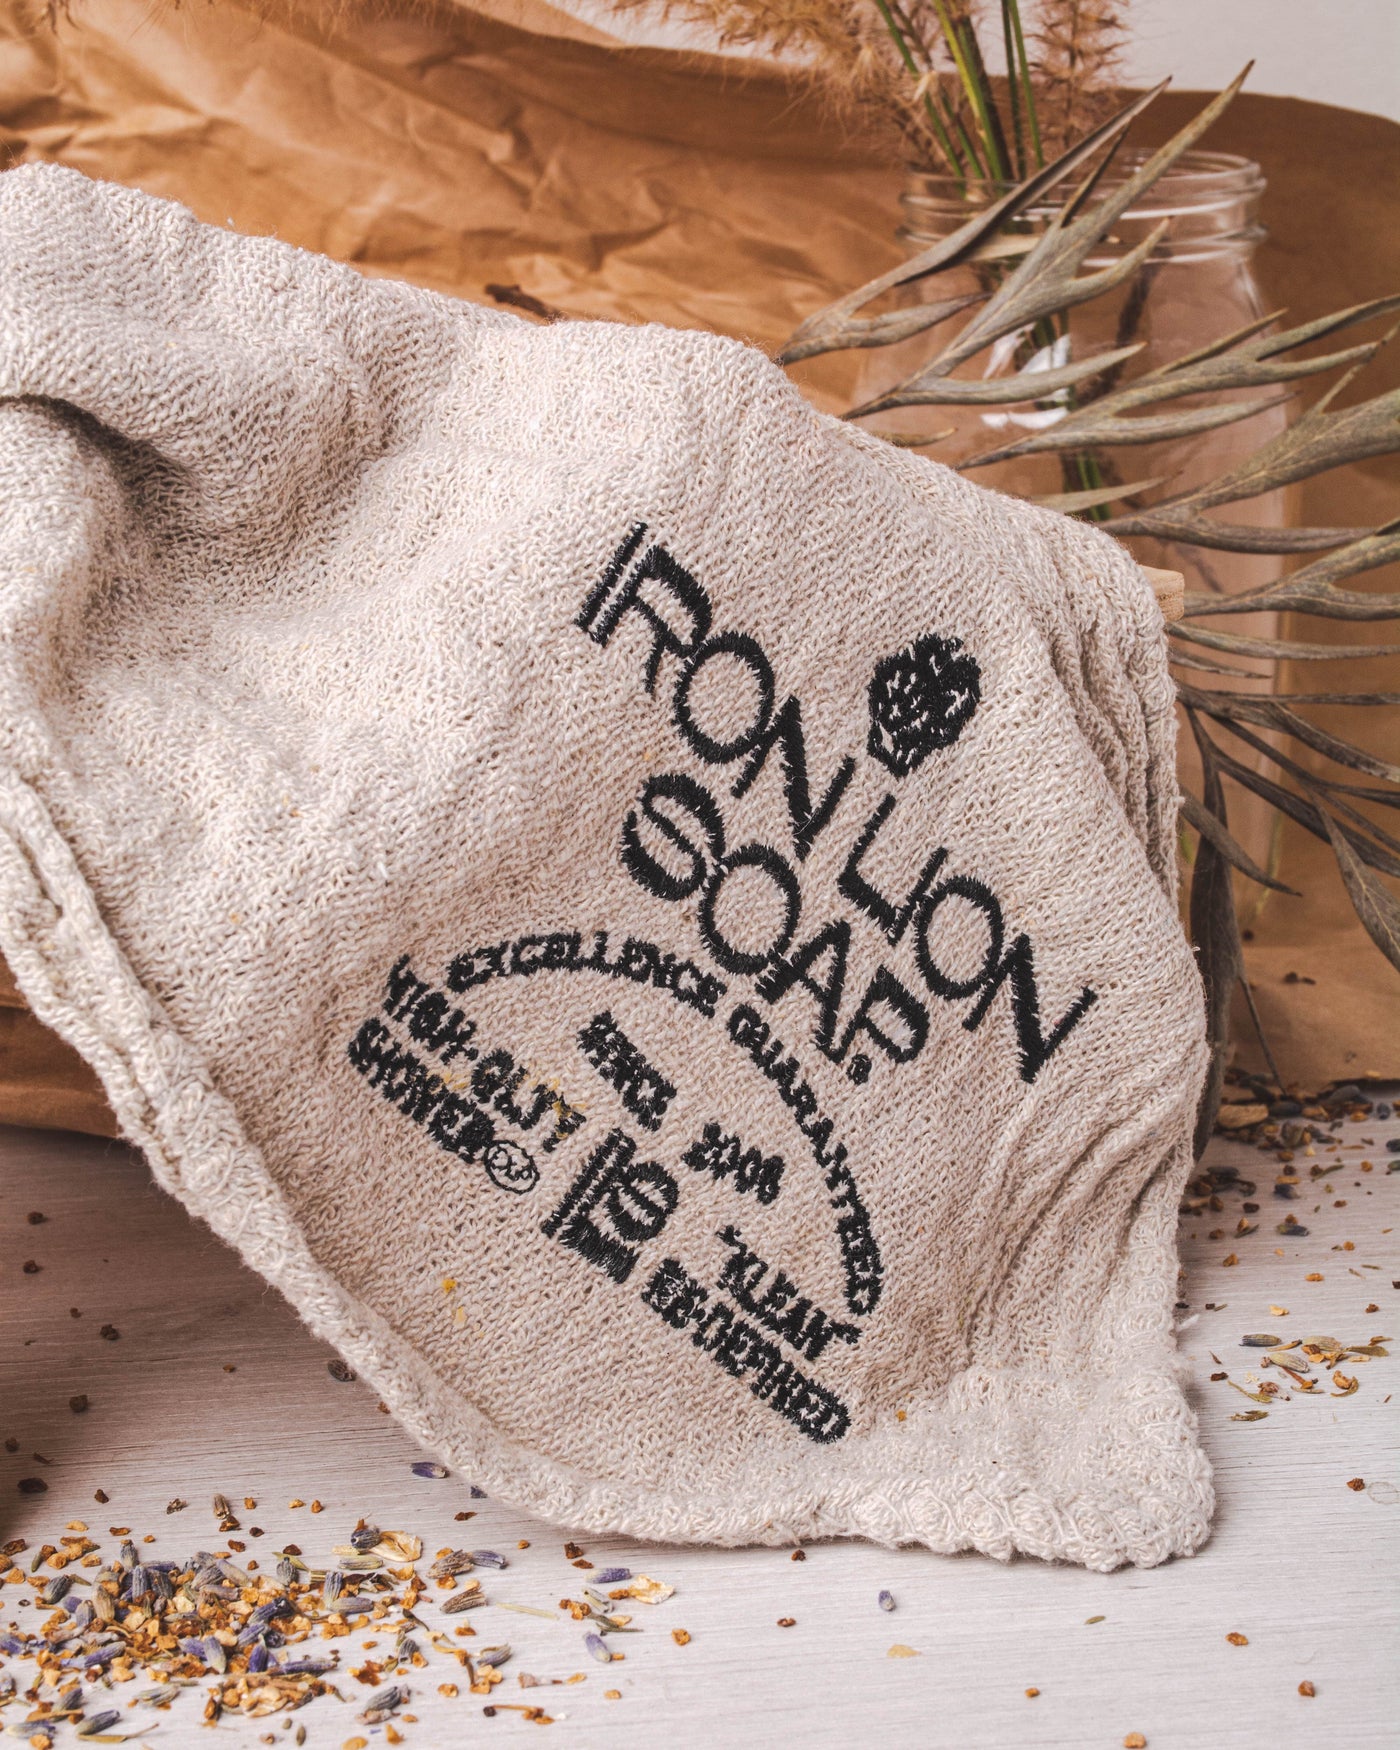 Embroidered Wash Rag Iron Lion Soap 